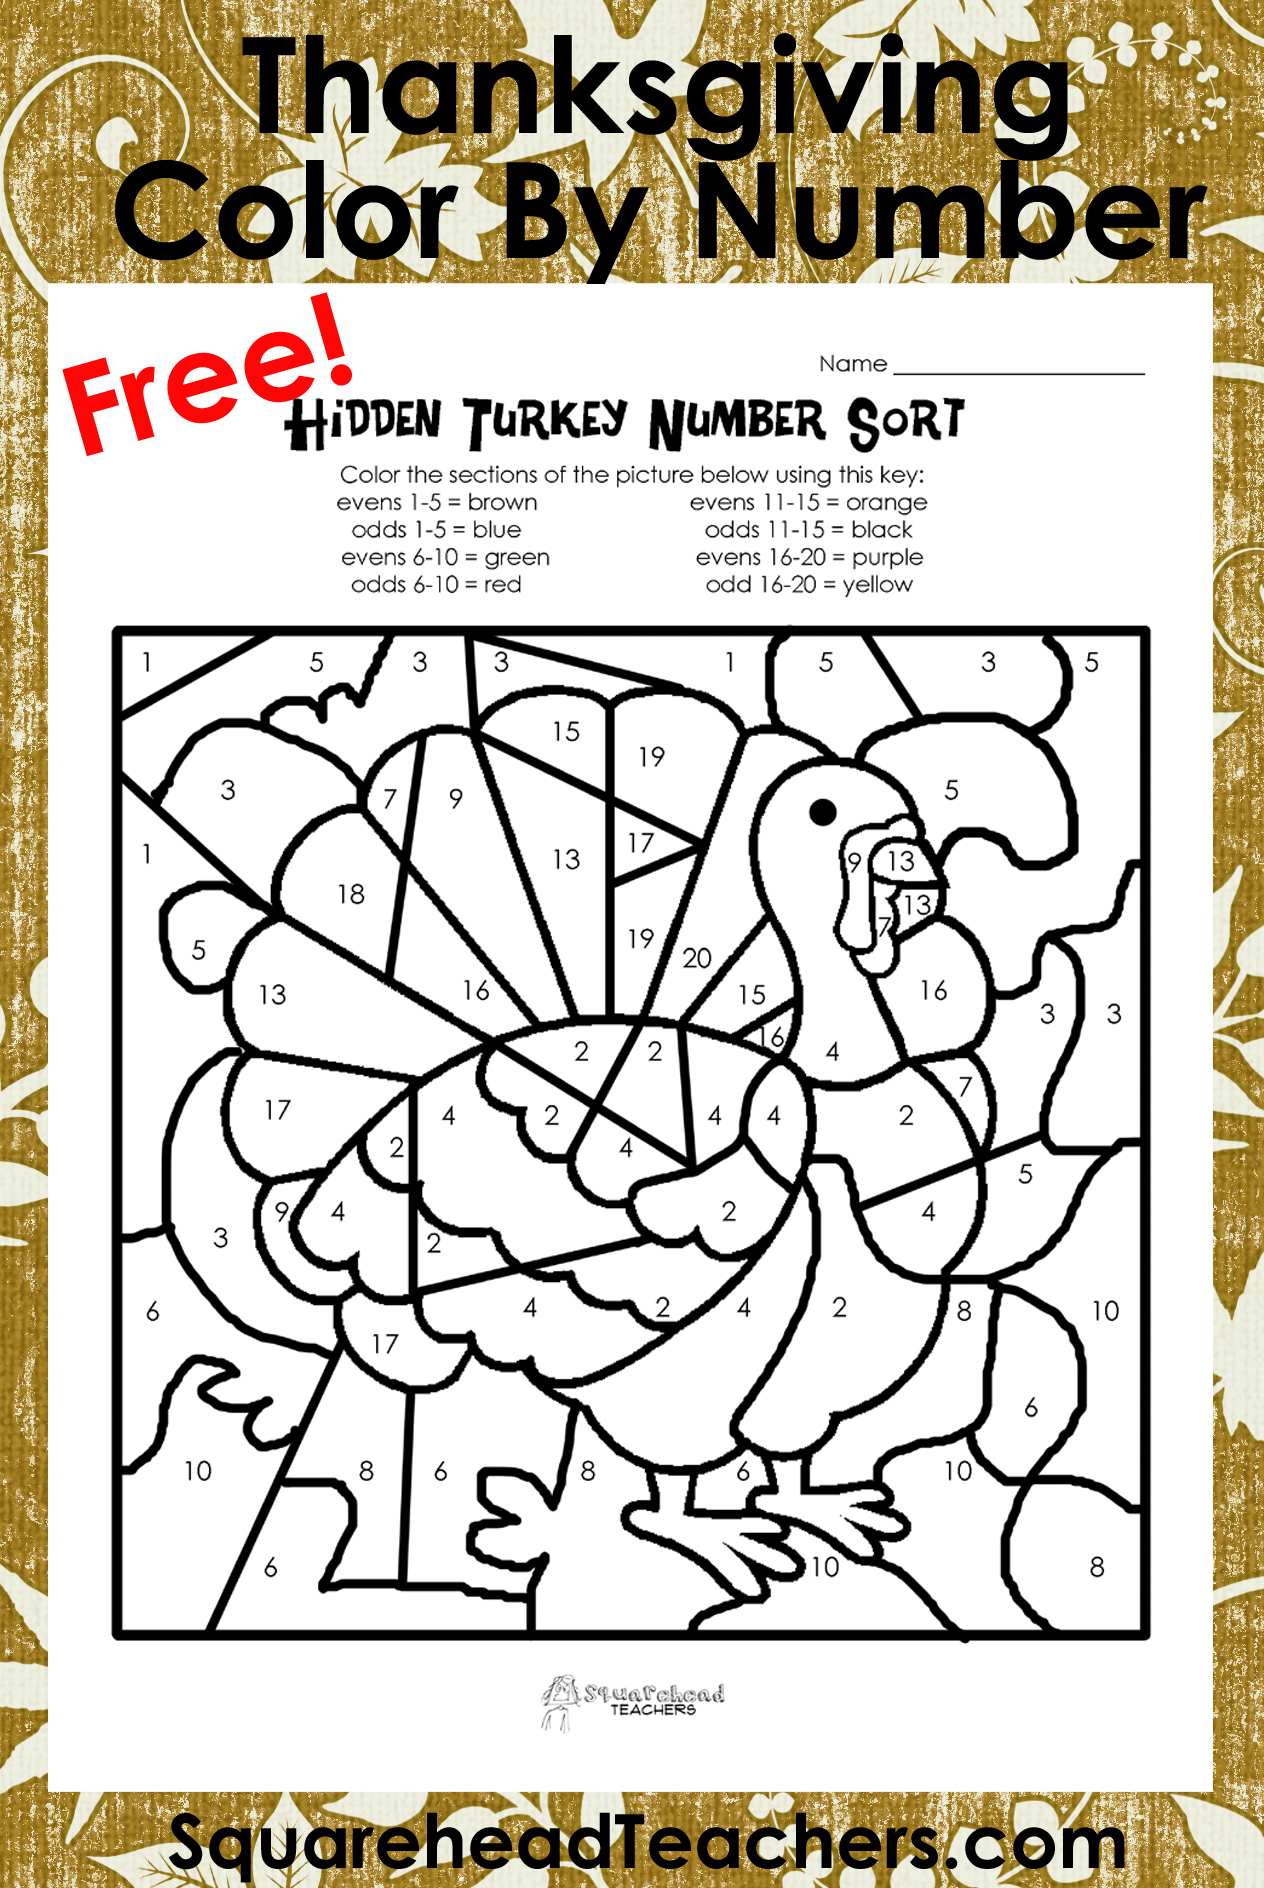 Coloring Pages : Tremendous Thanksgivingornumber Turkey for Printable Multiplication Turkey